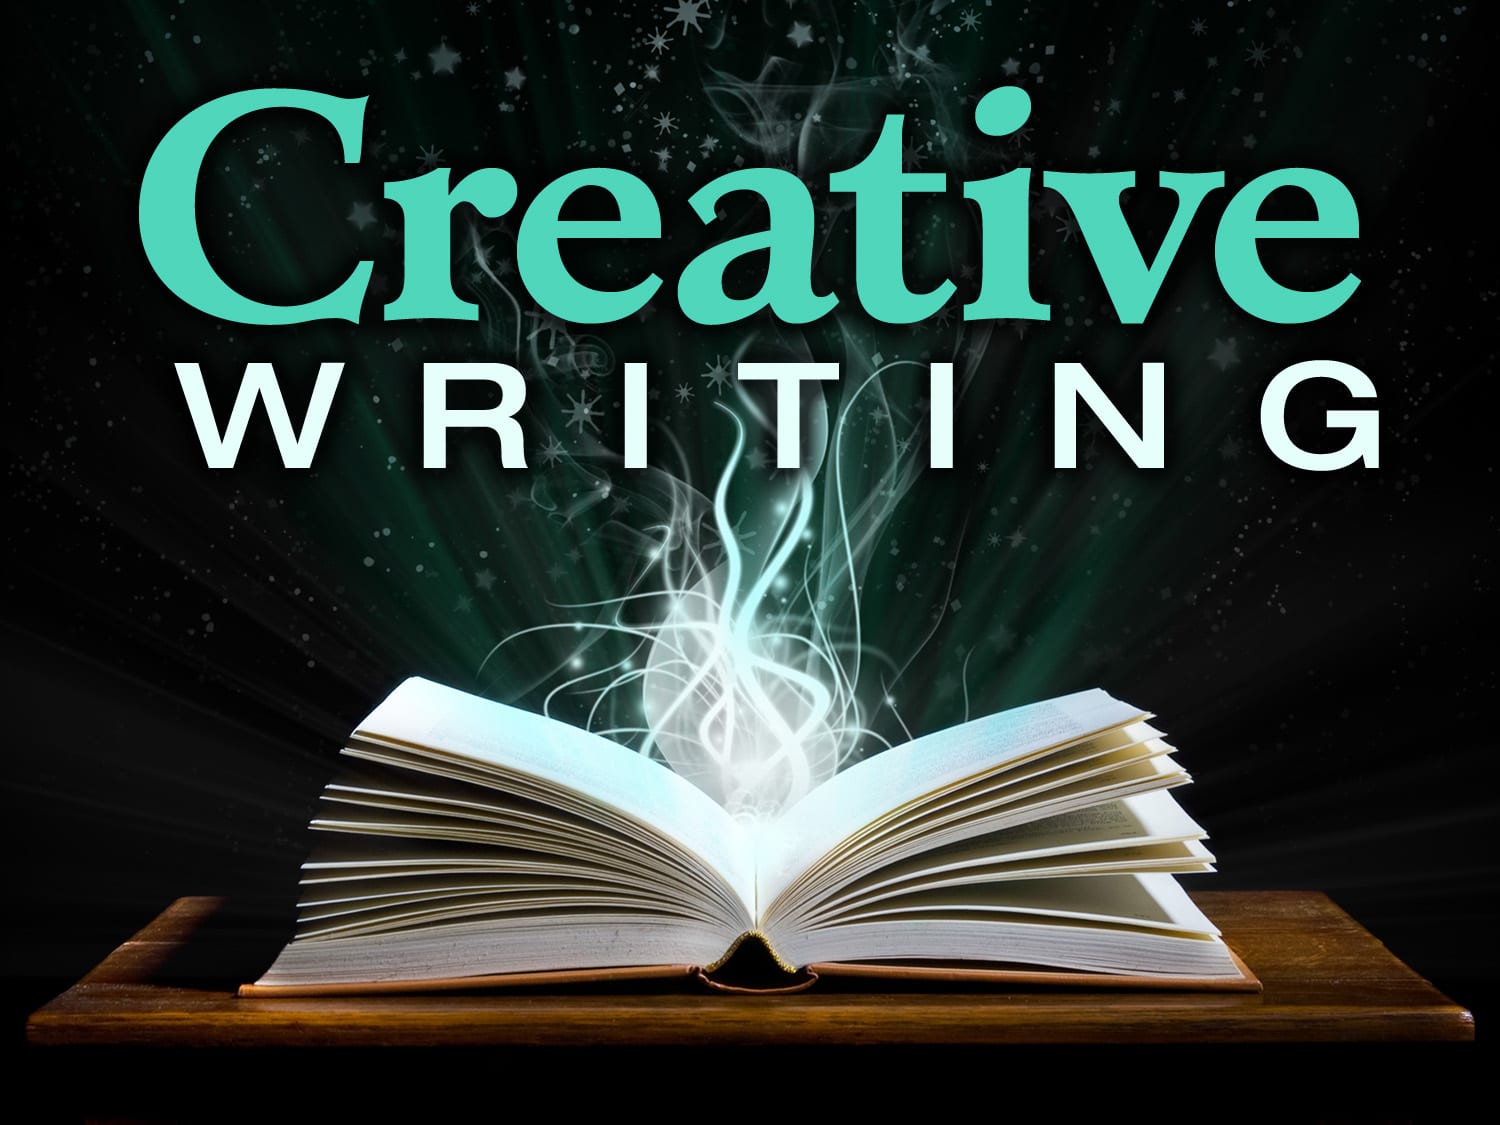 I am a writer by passion .I used my skills to write creative and engaging content.